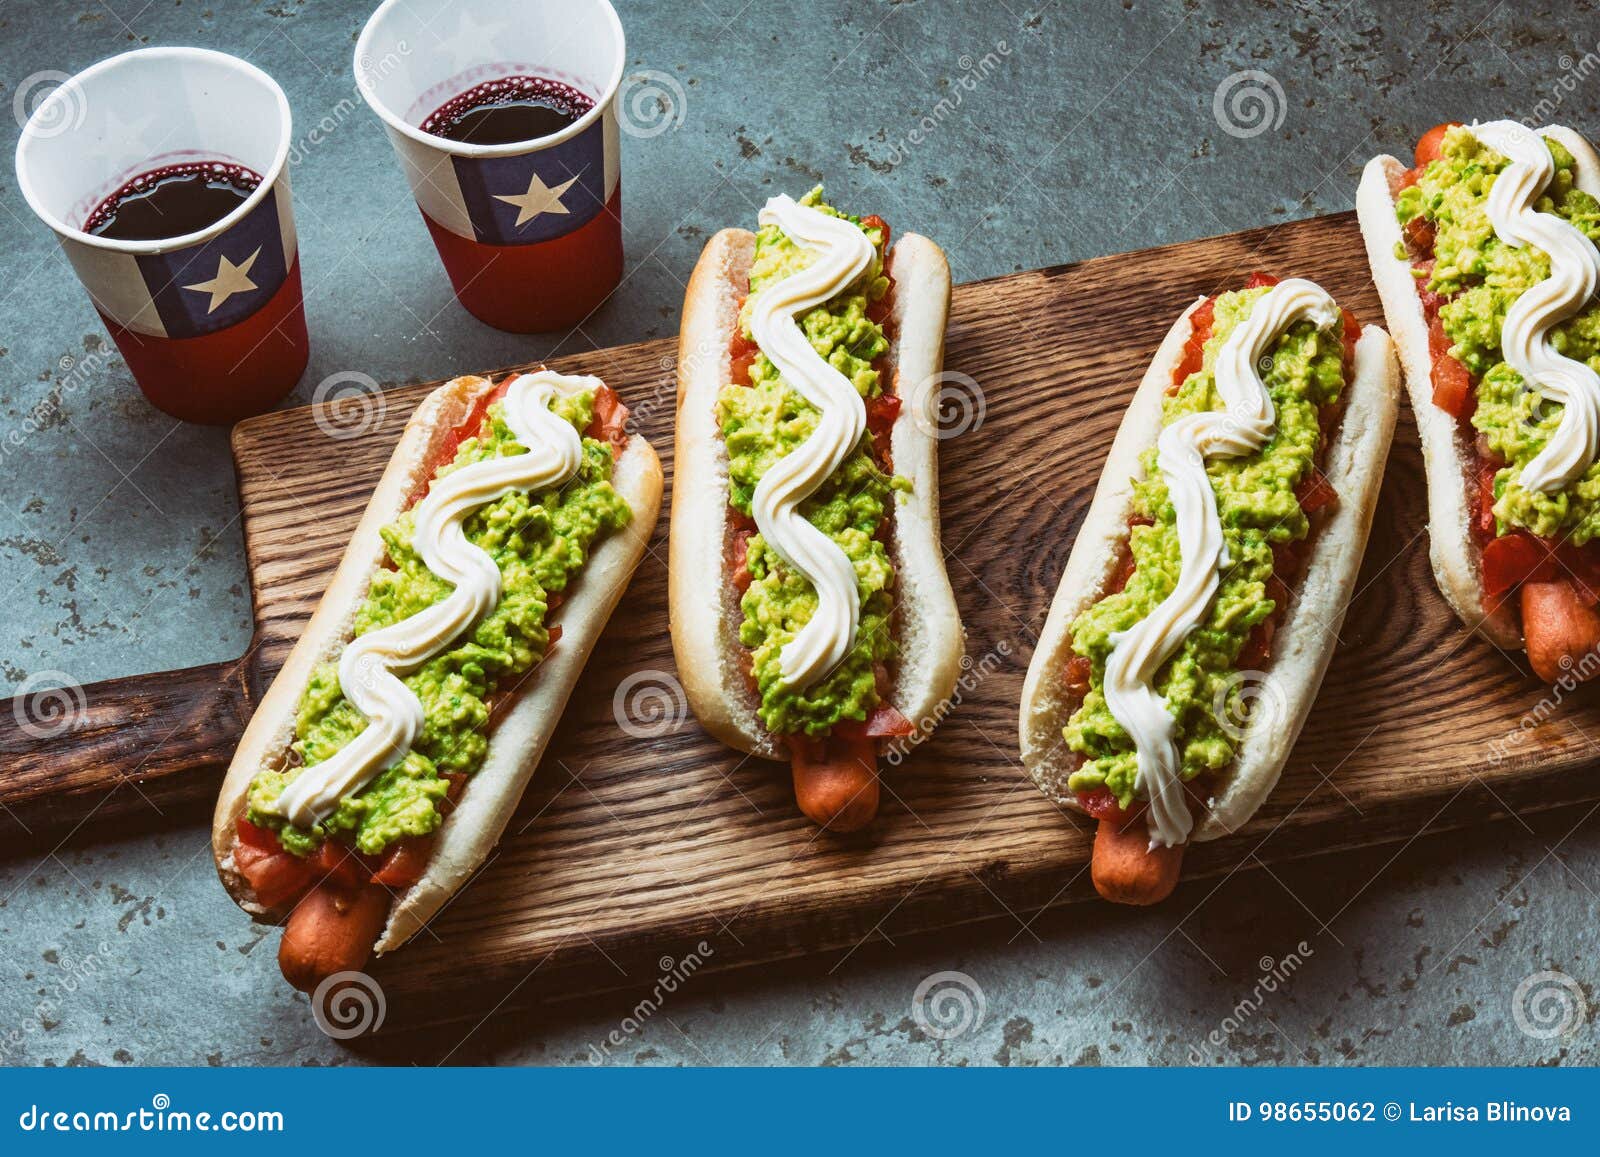 chilean completo italiano. hot dog sandwiches with tomato, avocado and mayonnaise served on wooden board with drink in